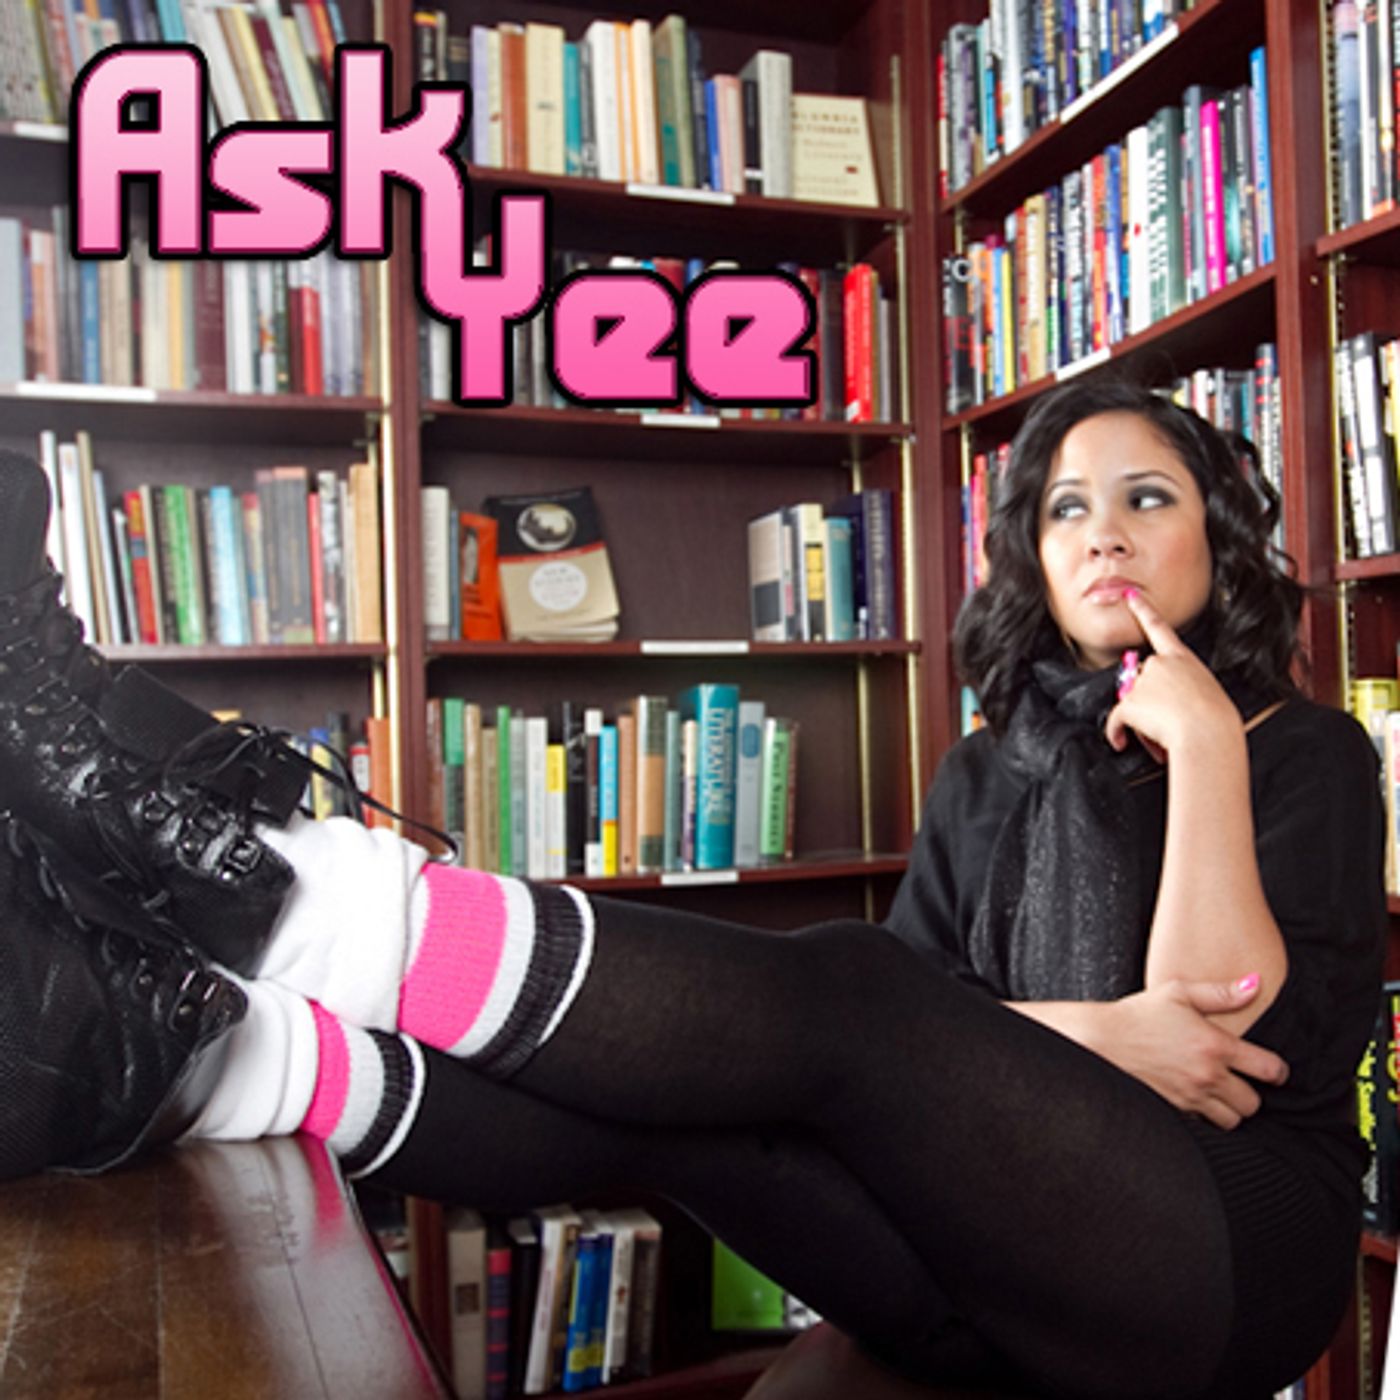 ASK YEE ( CONTROLLING BF/ CHEATING EX)